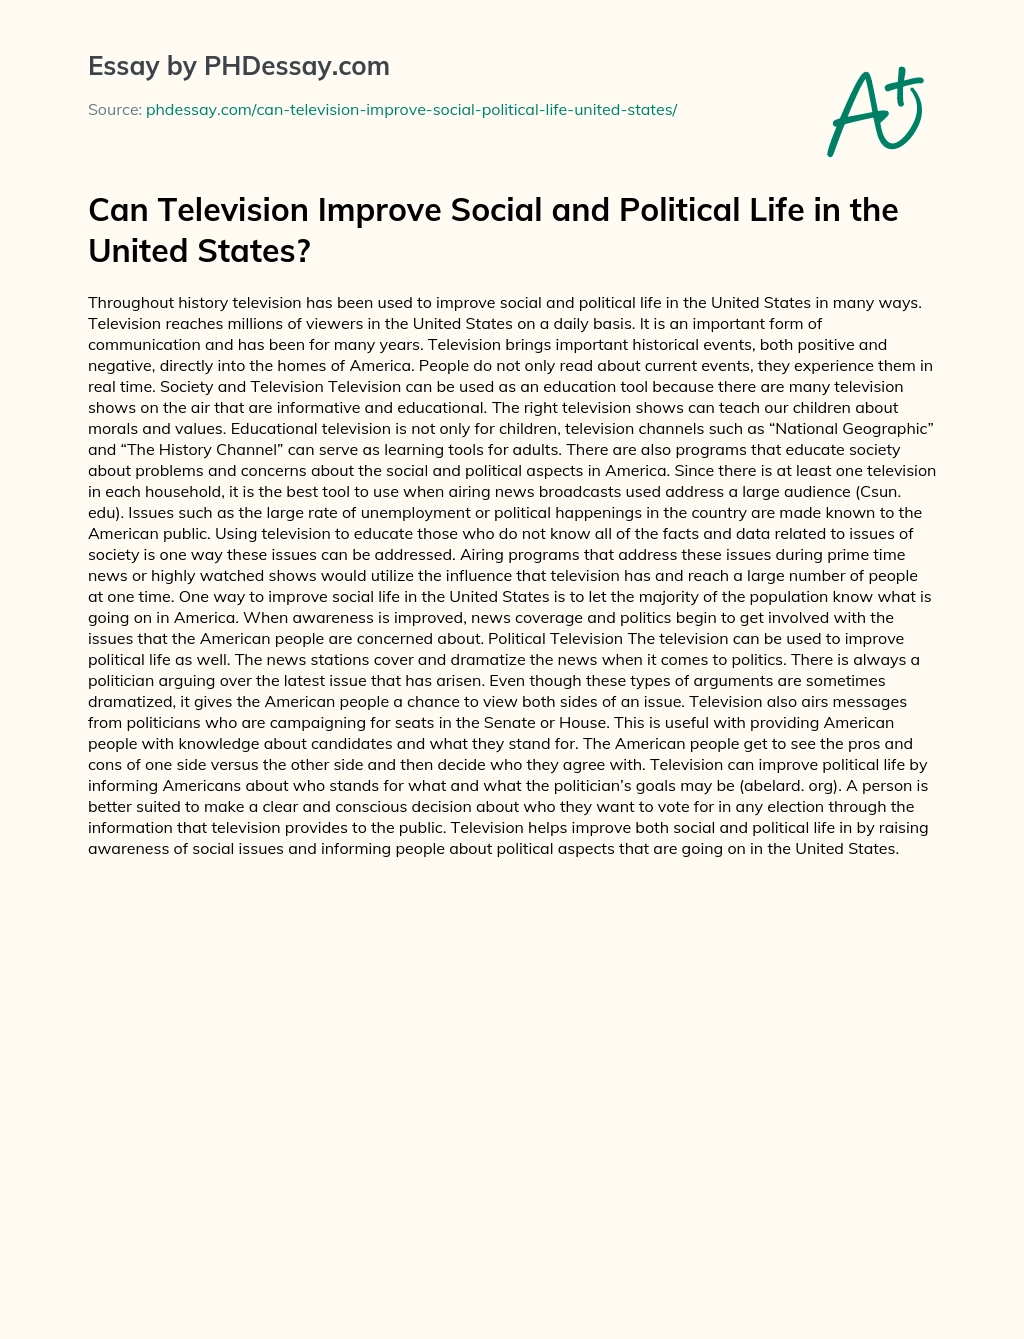 Can Television Improve Social and Political Life in the United States? essay